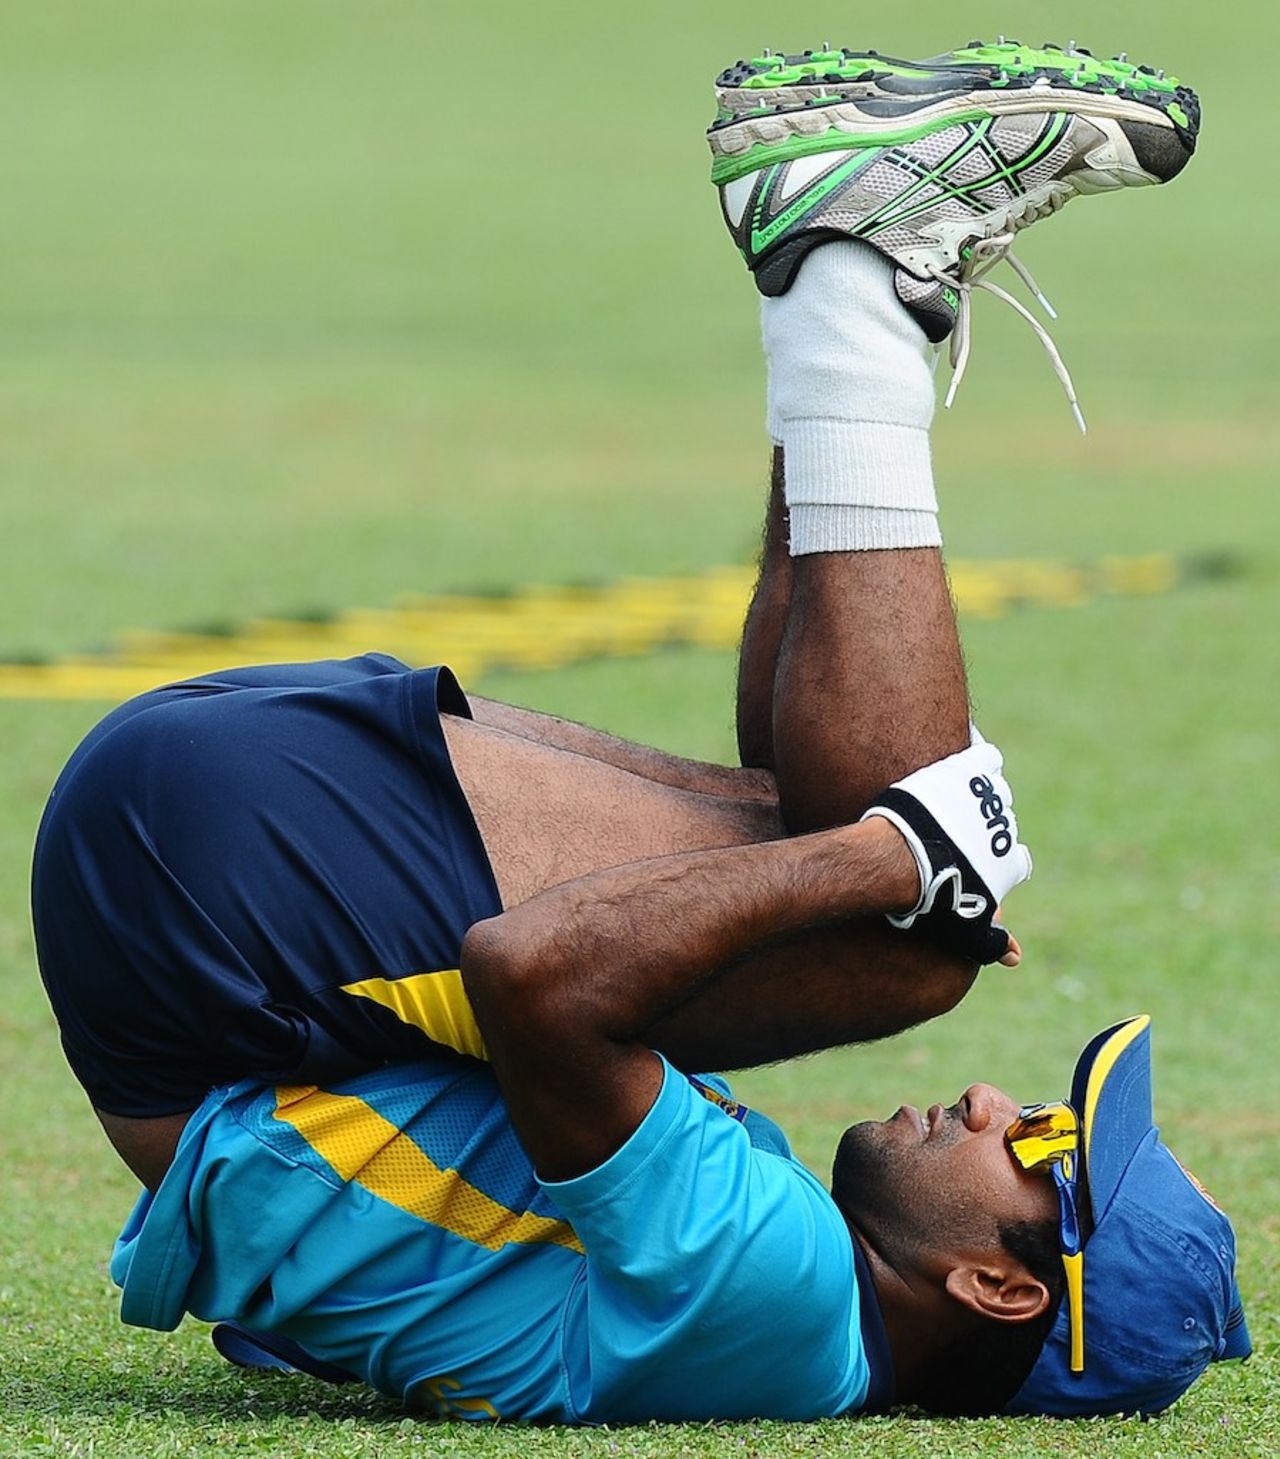 Dhammika Prasad stretches during a practice session, Galle, July 15, 2014